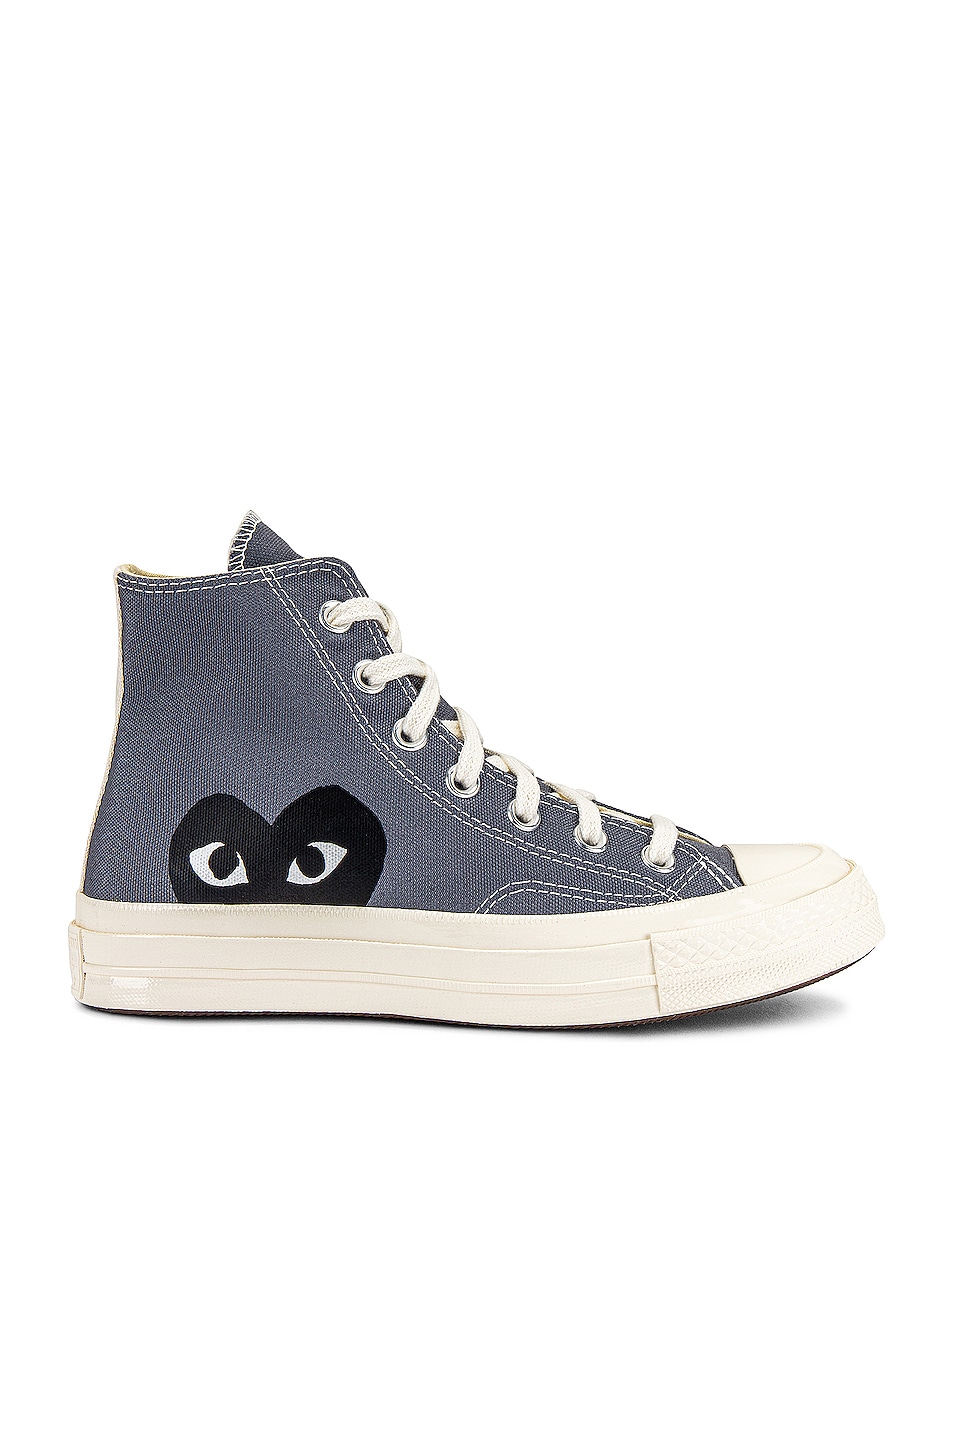 COMME des GARCONS PLAY Converse Chuck Taylor High in Grey | FWRD